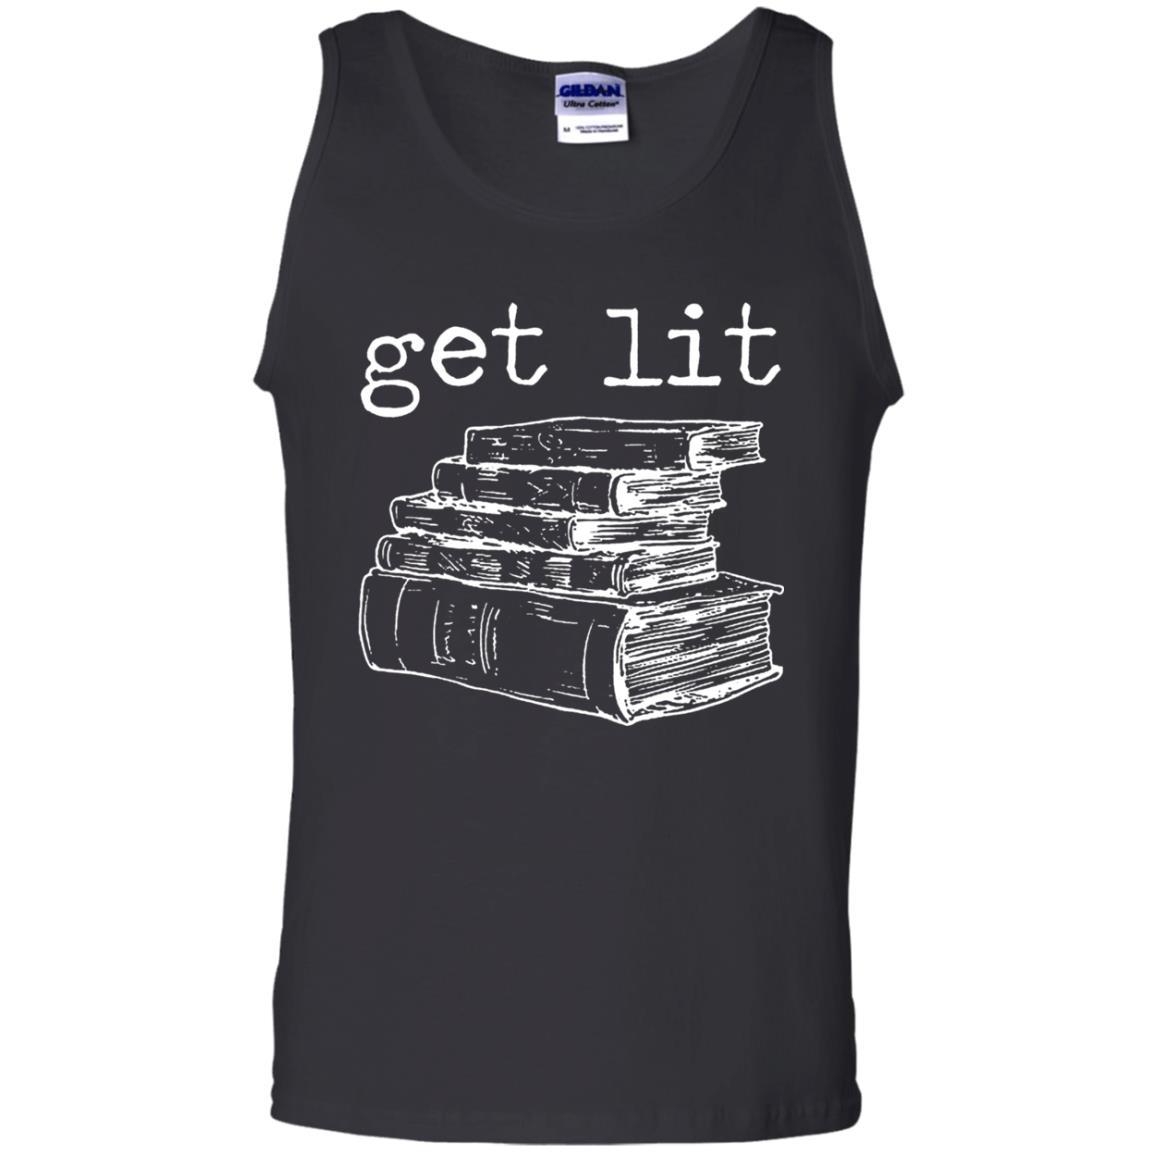 Merry Christmas T-shirt Get Lit Design With Books